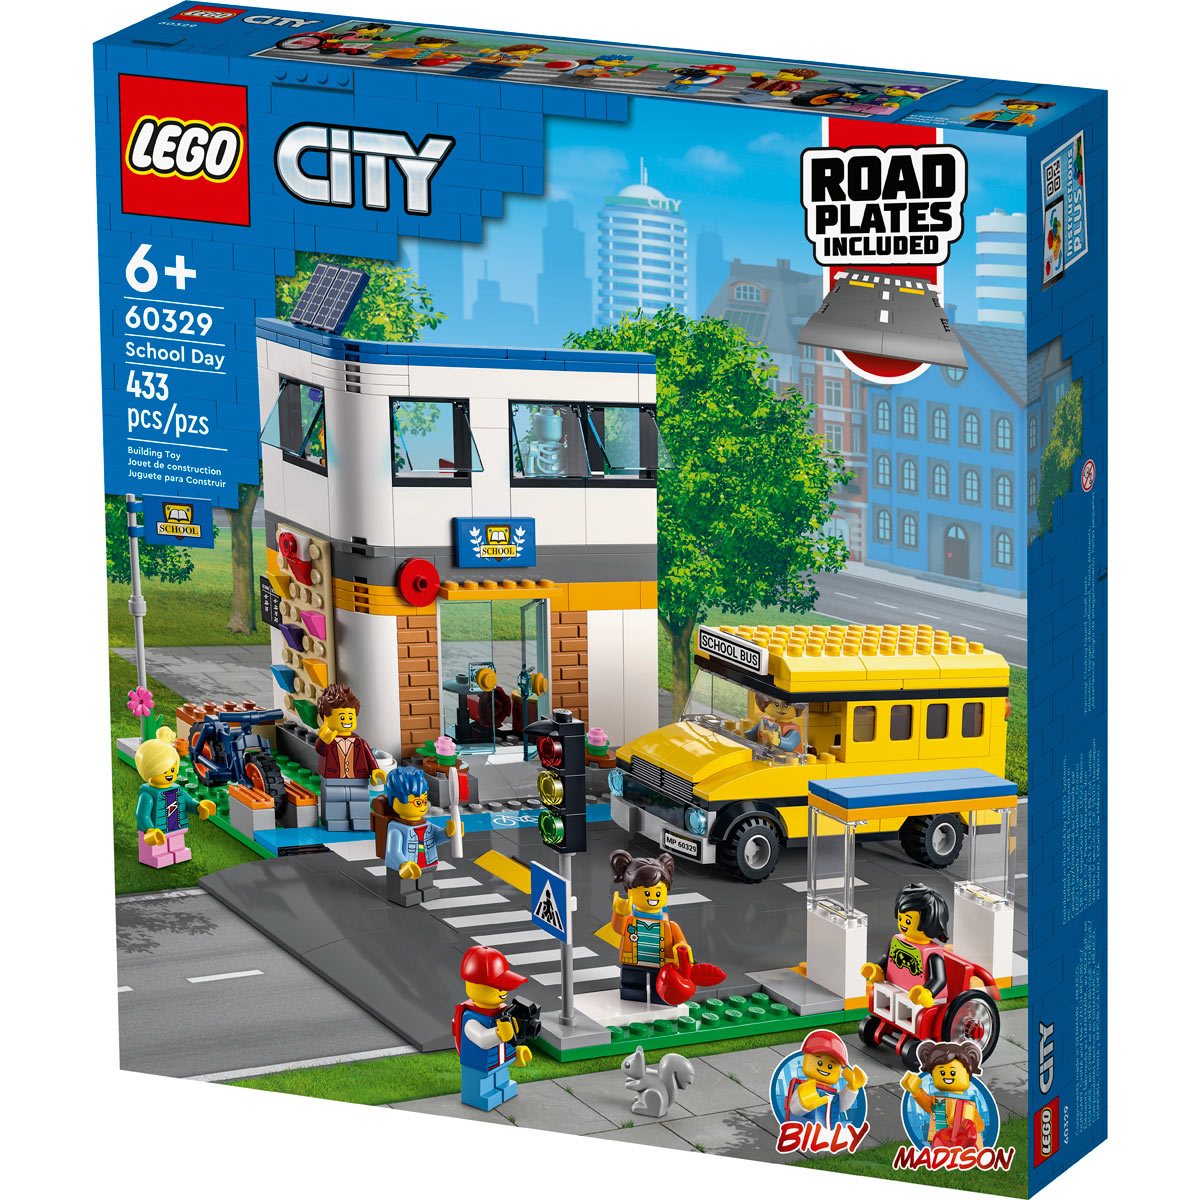 Lego City School Day – The Rocking Horse Toys